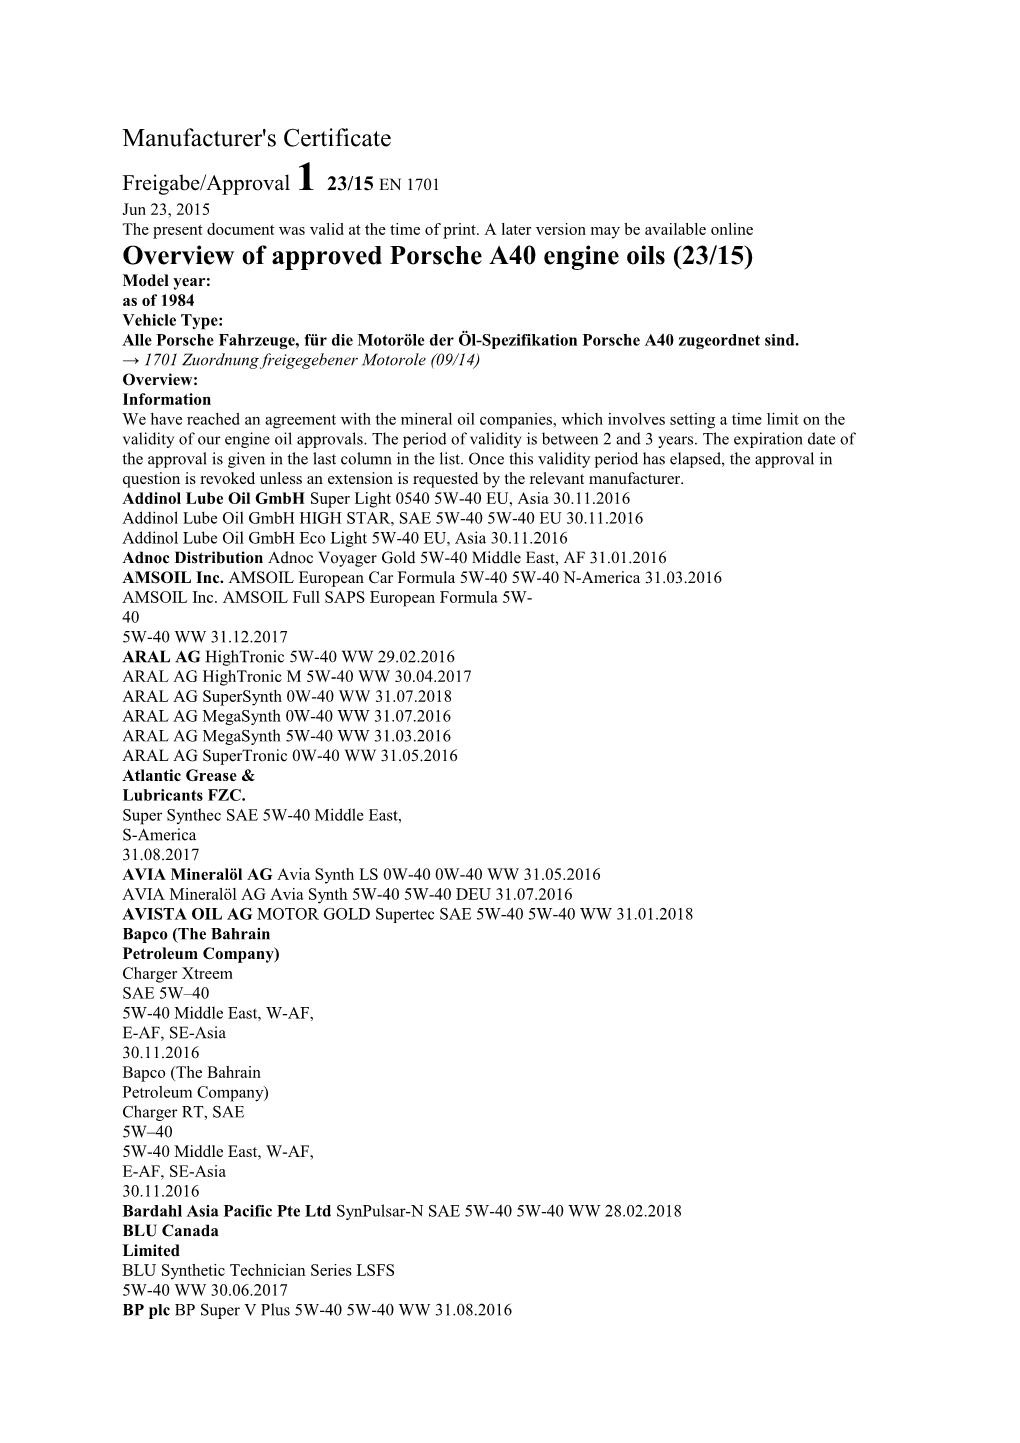 Overview of Approved Porsche A40 Engine Oils (23/15)